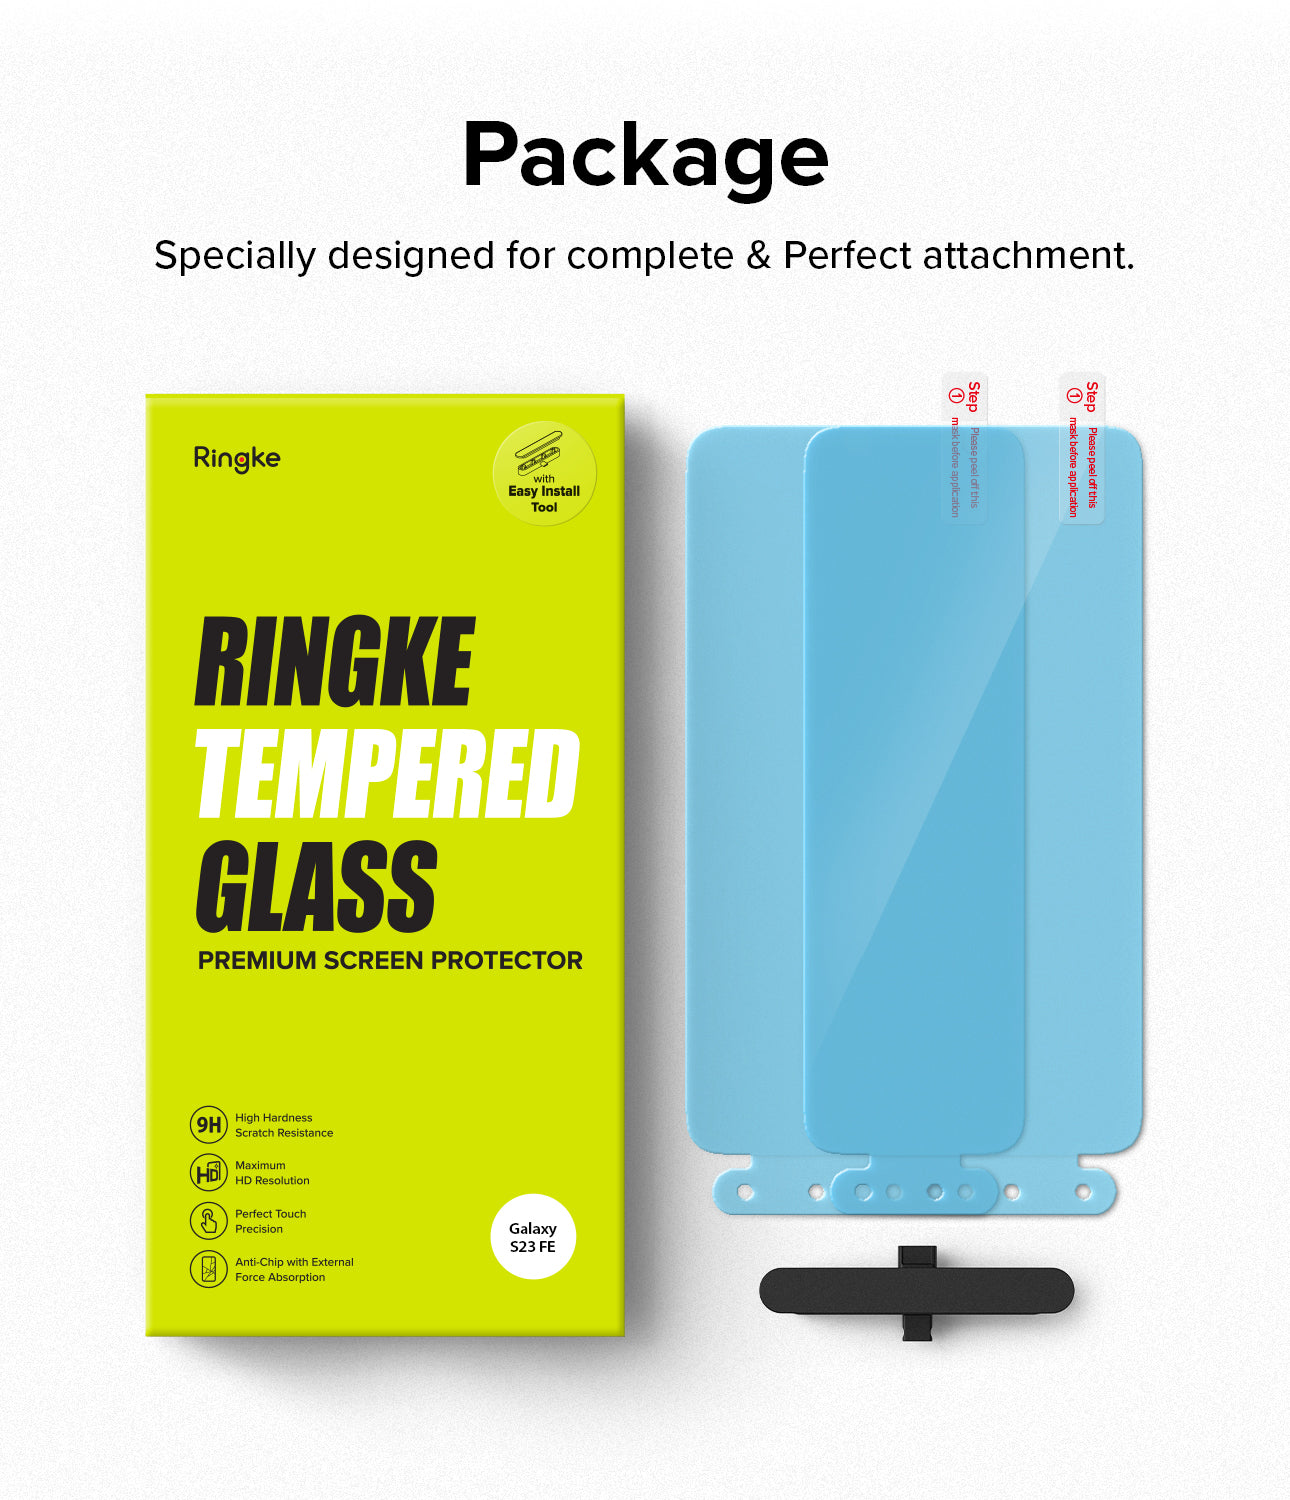 Galaxy S23 FE Screen Protector | Full Cover Glass - 2 Pack - Package.